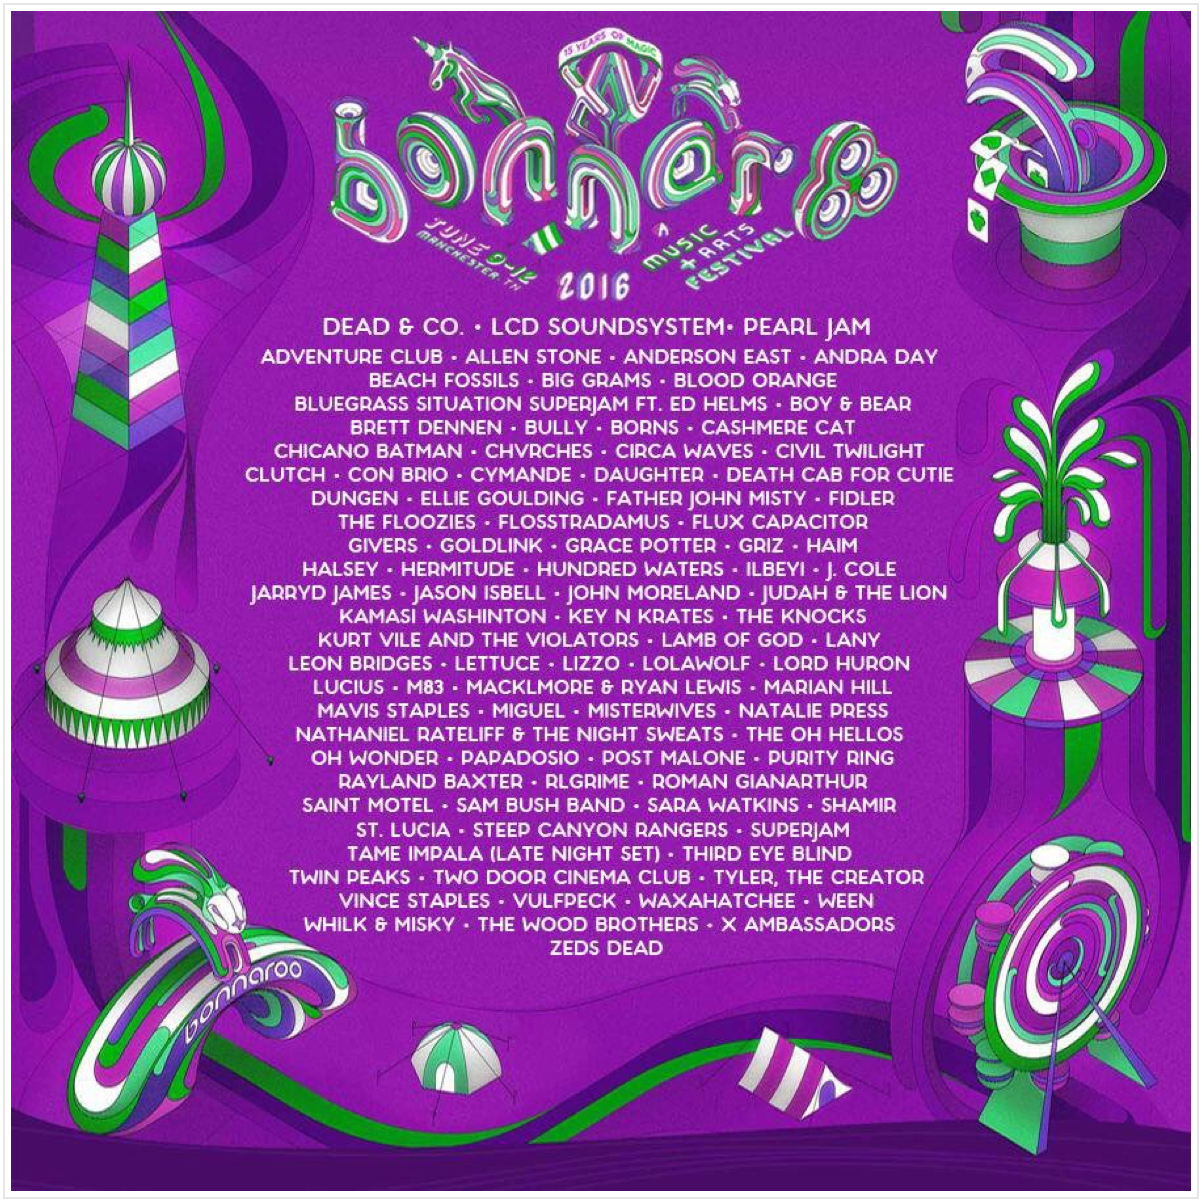 [FESTIVAL NEWS] Bonnaroo's 2016 Lineup May Have Just Leaked | The Sights And Sounds1202 x 1204